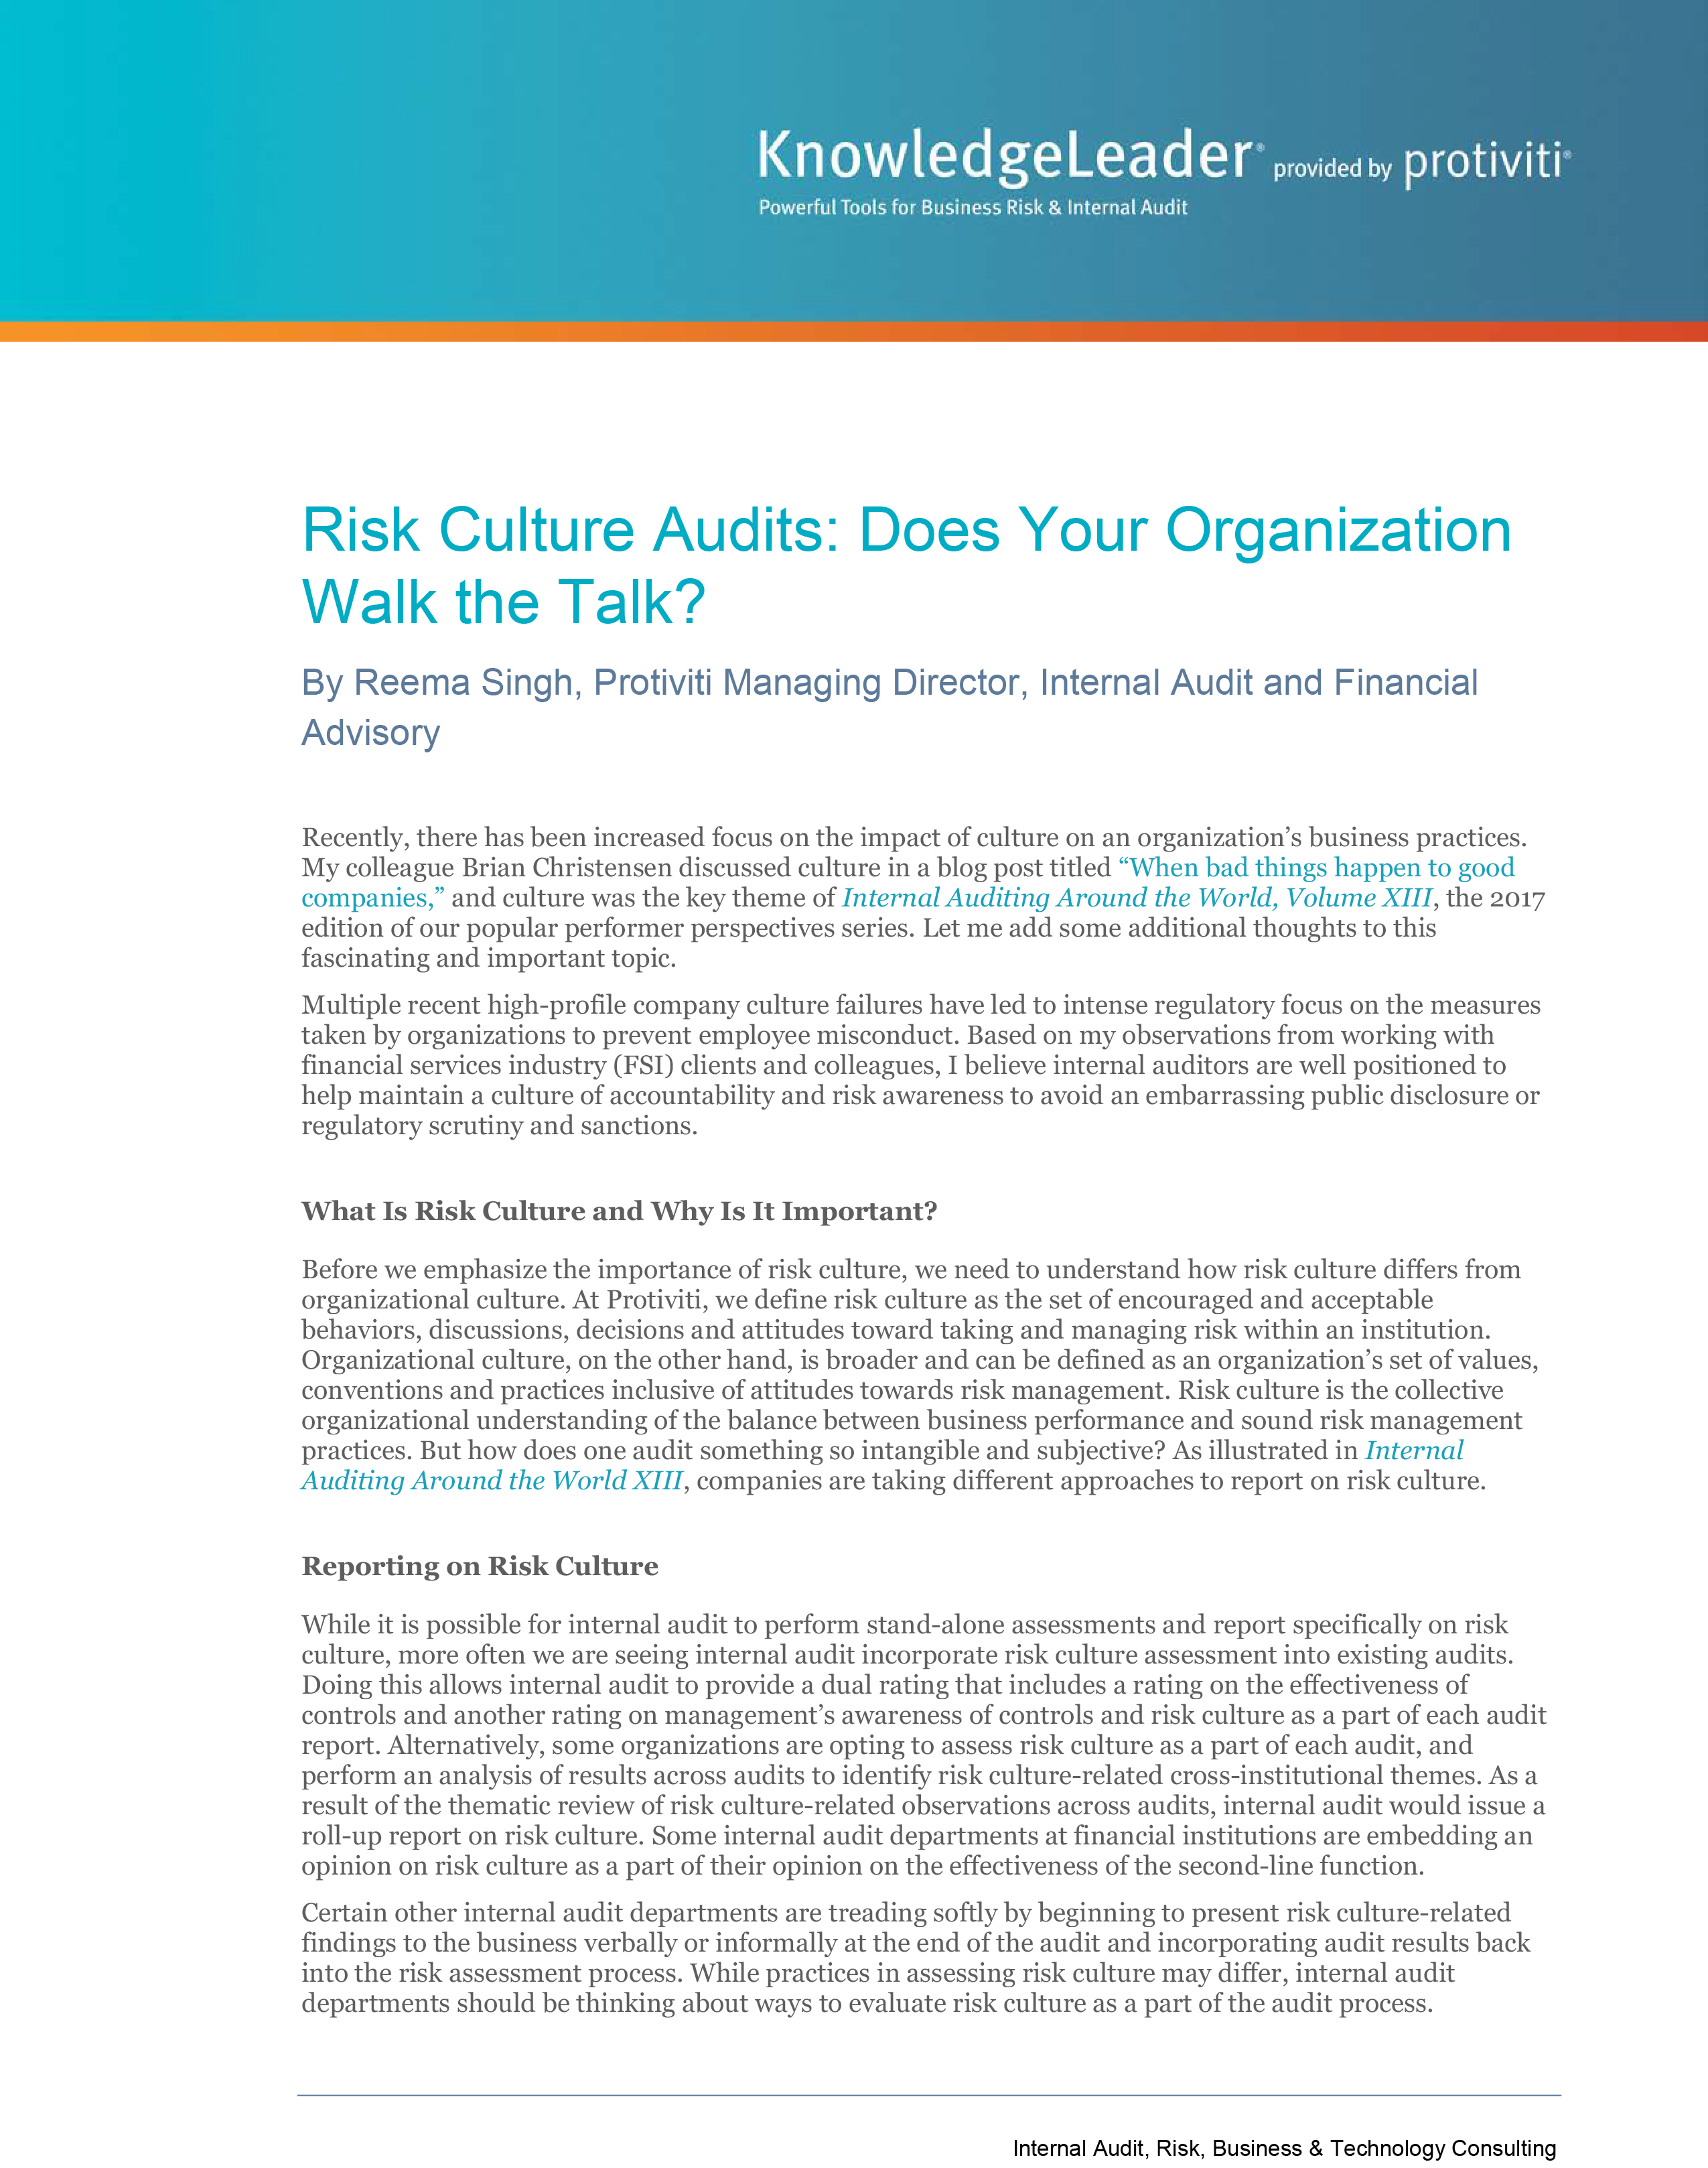 Screenshot of the first page of Risk Culture Audits-Does Your Organization Walk the Talk